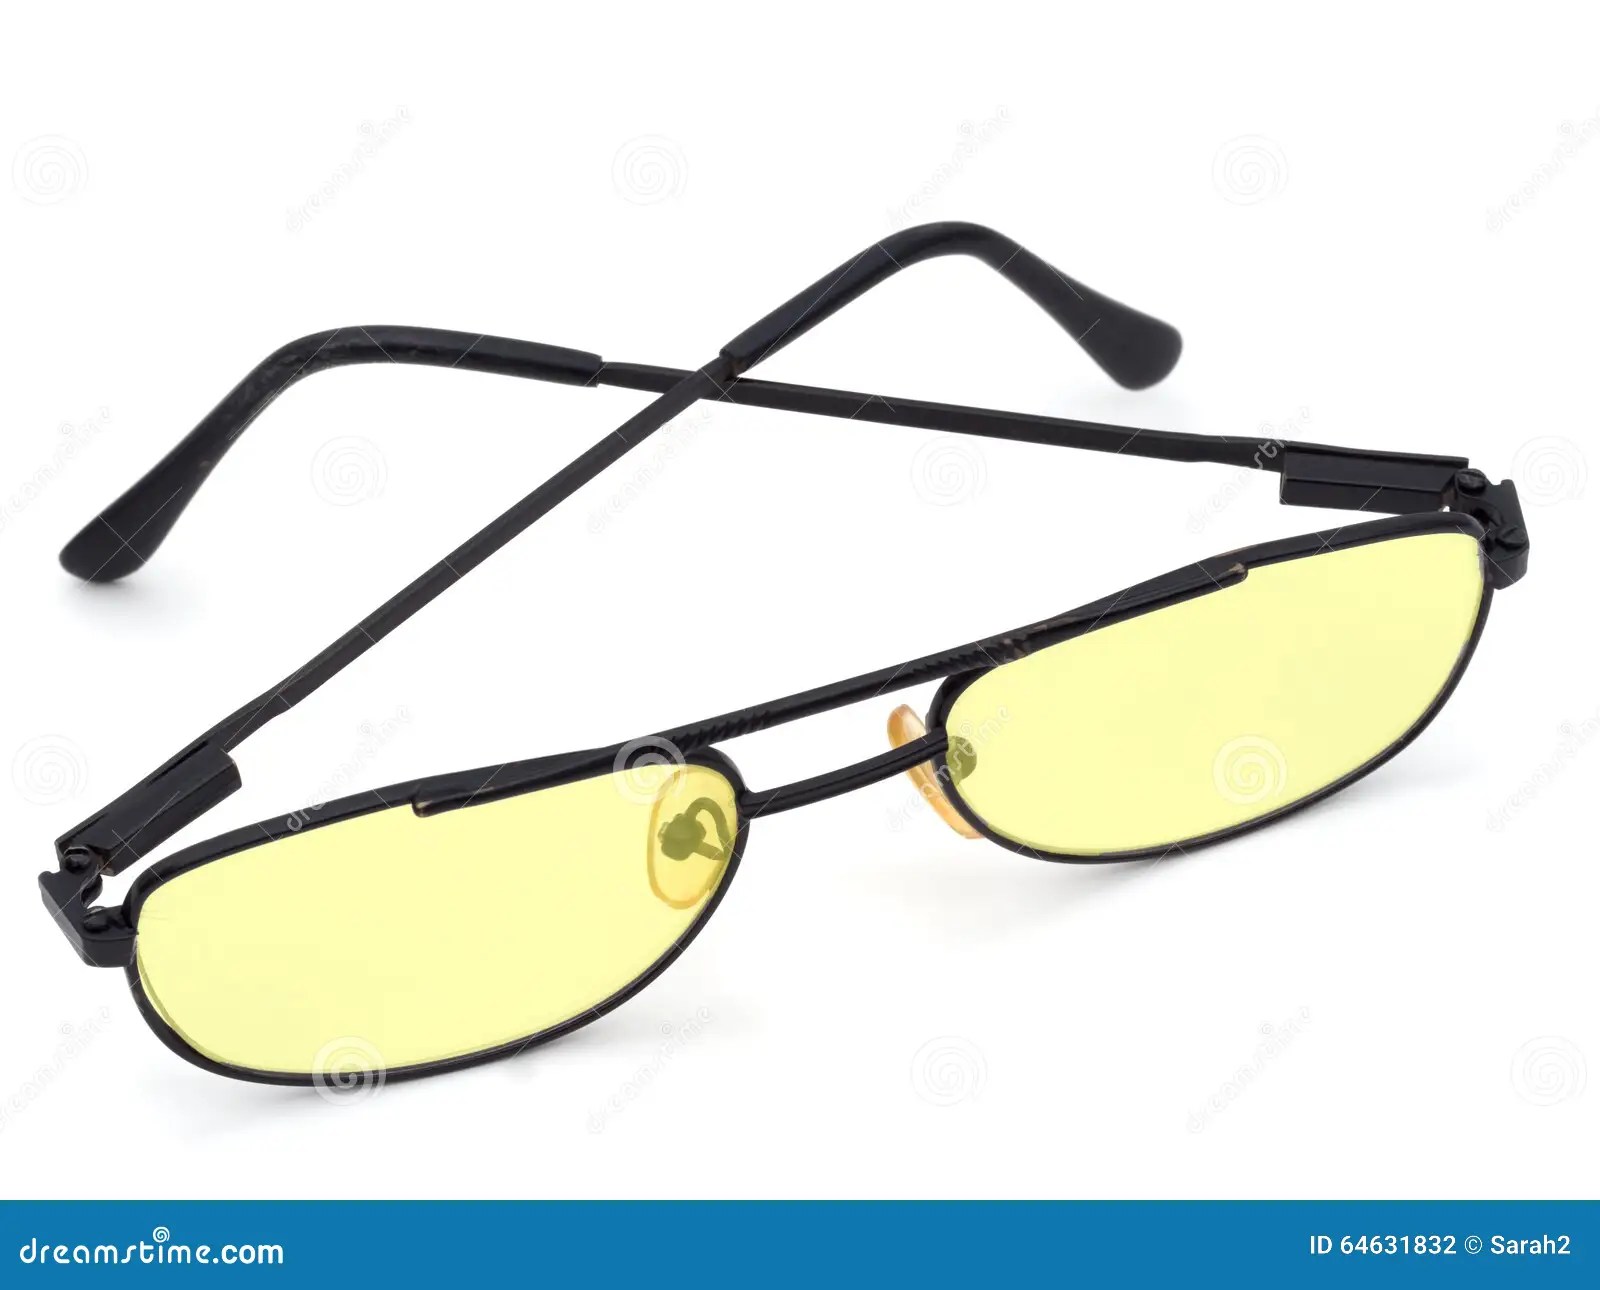 Glasses With Yellow Lenses. Dyslexia. Computer Use Etc